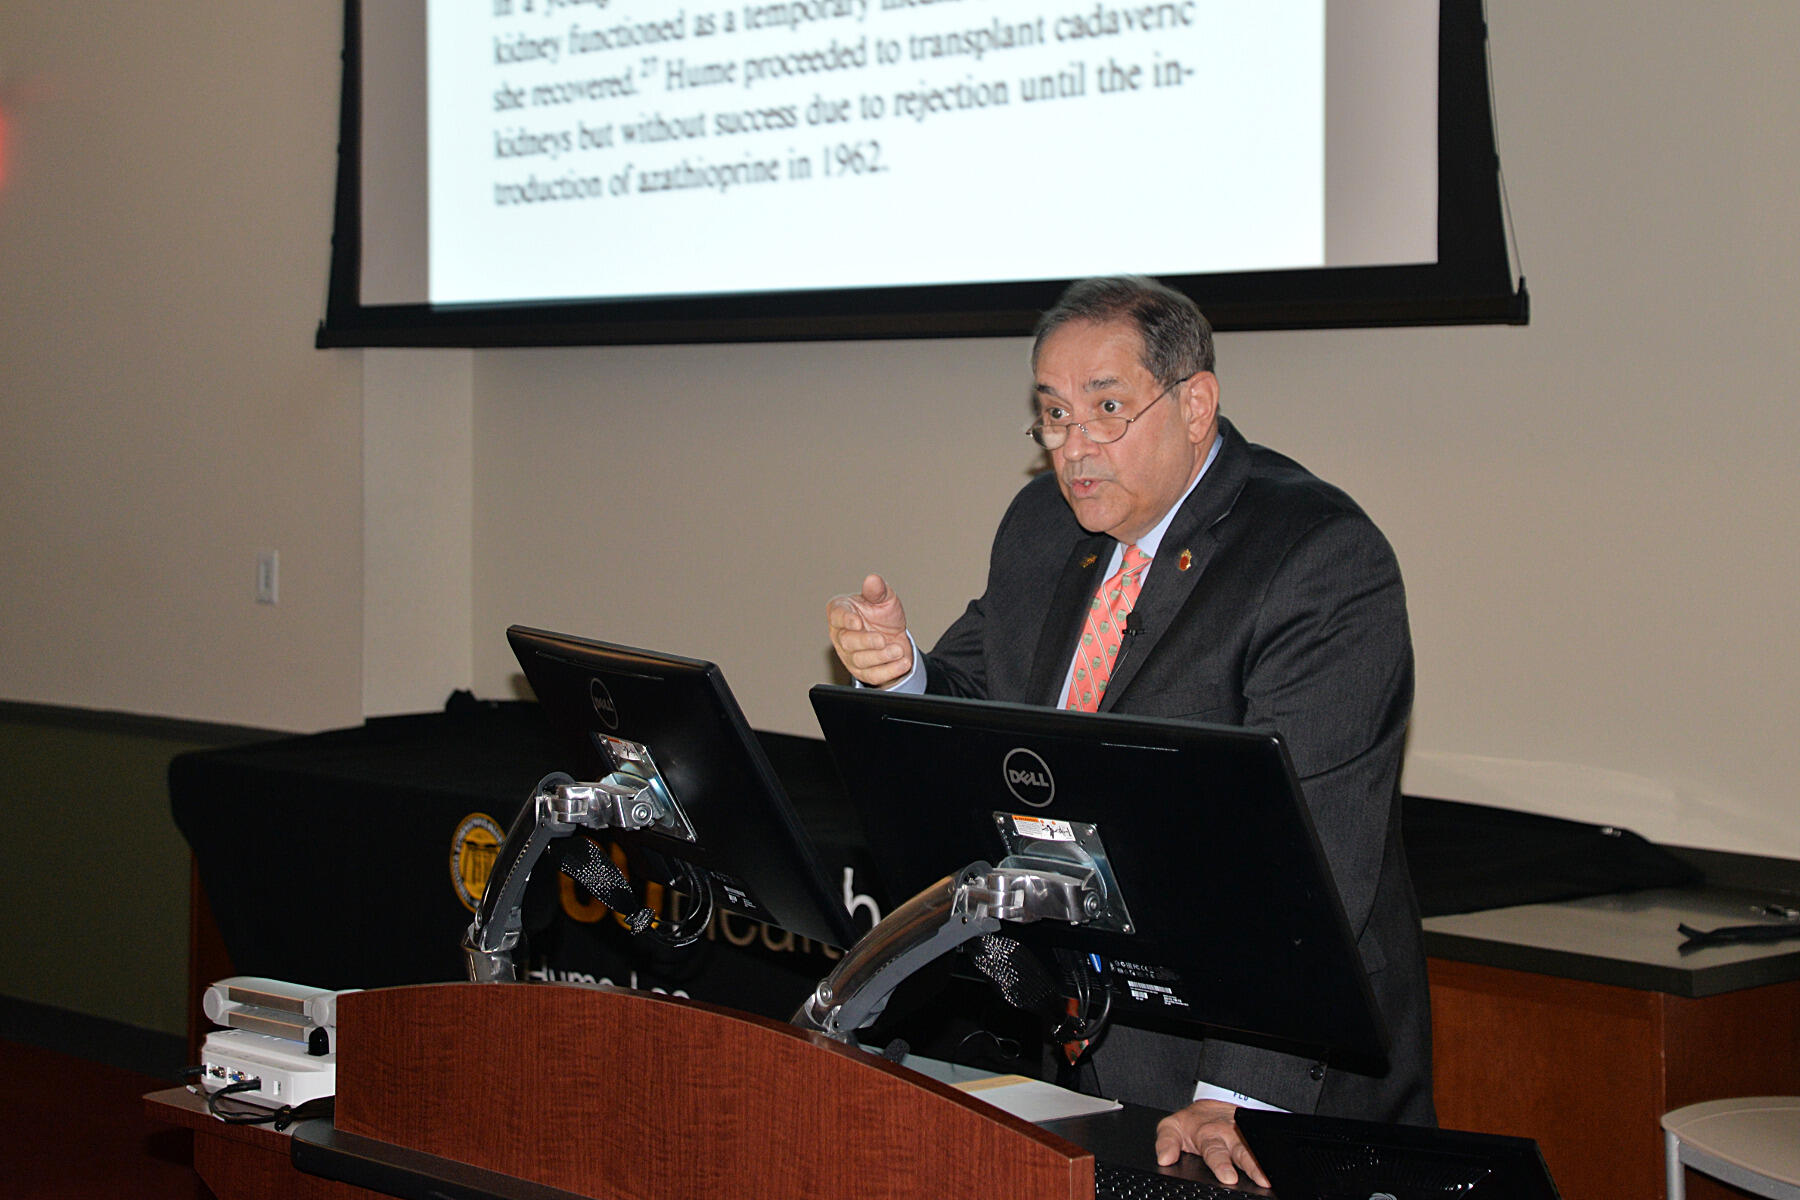 Francis Delmonico speaks with attendees Dec. 2 as part of the VCU Health Hume-Lee Transplant Center’s 60th anniversary.